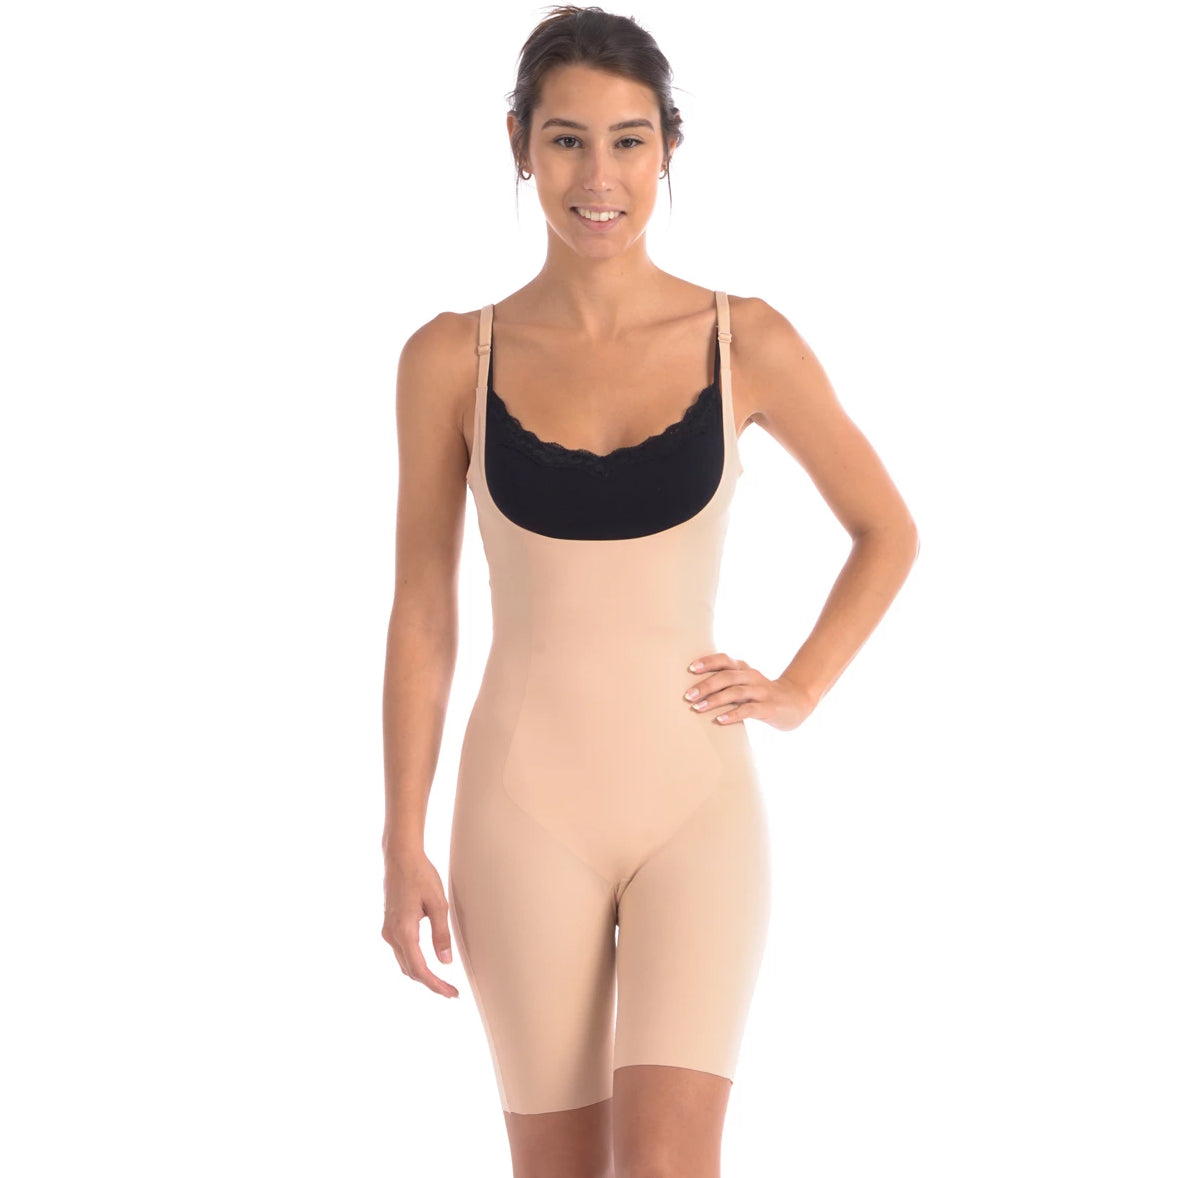 Wear your own Bra Bodysuit Shaper with Targeted Double Front Panel